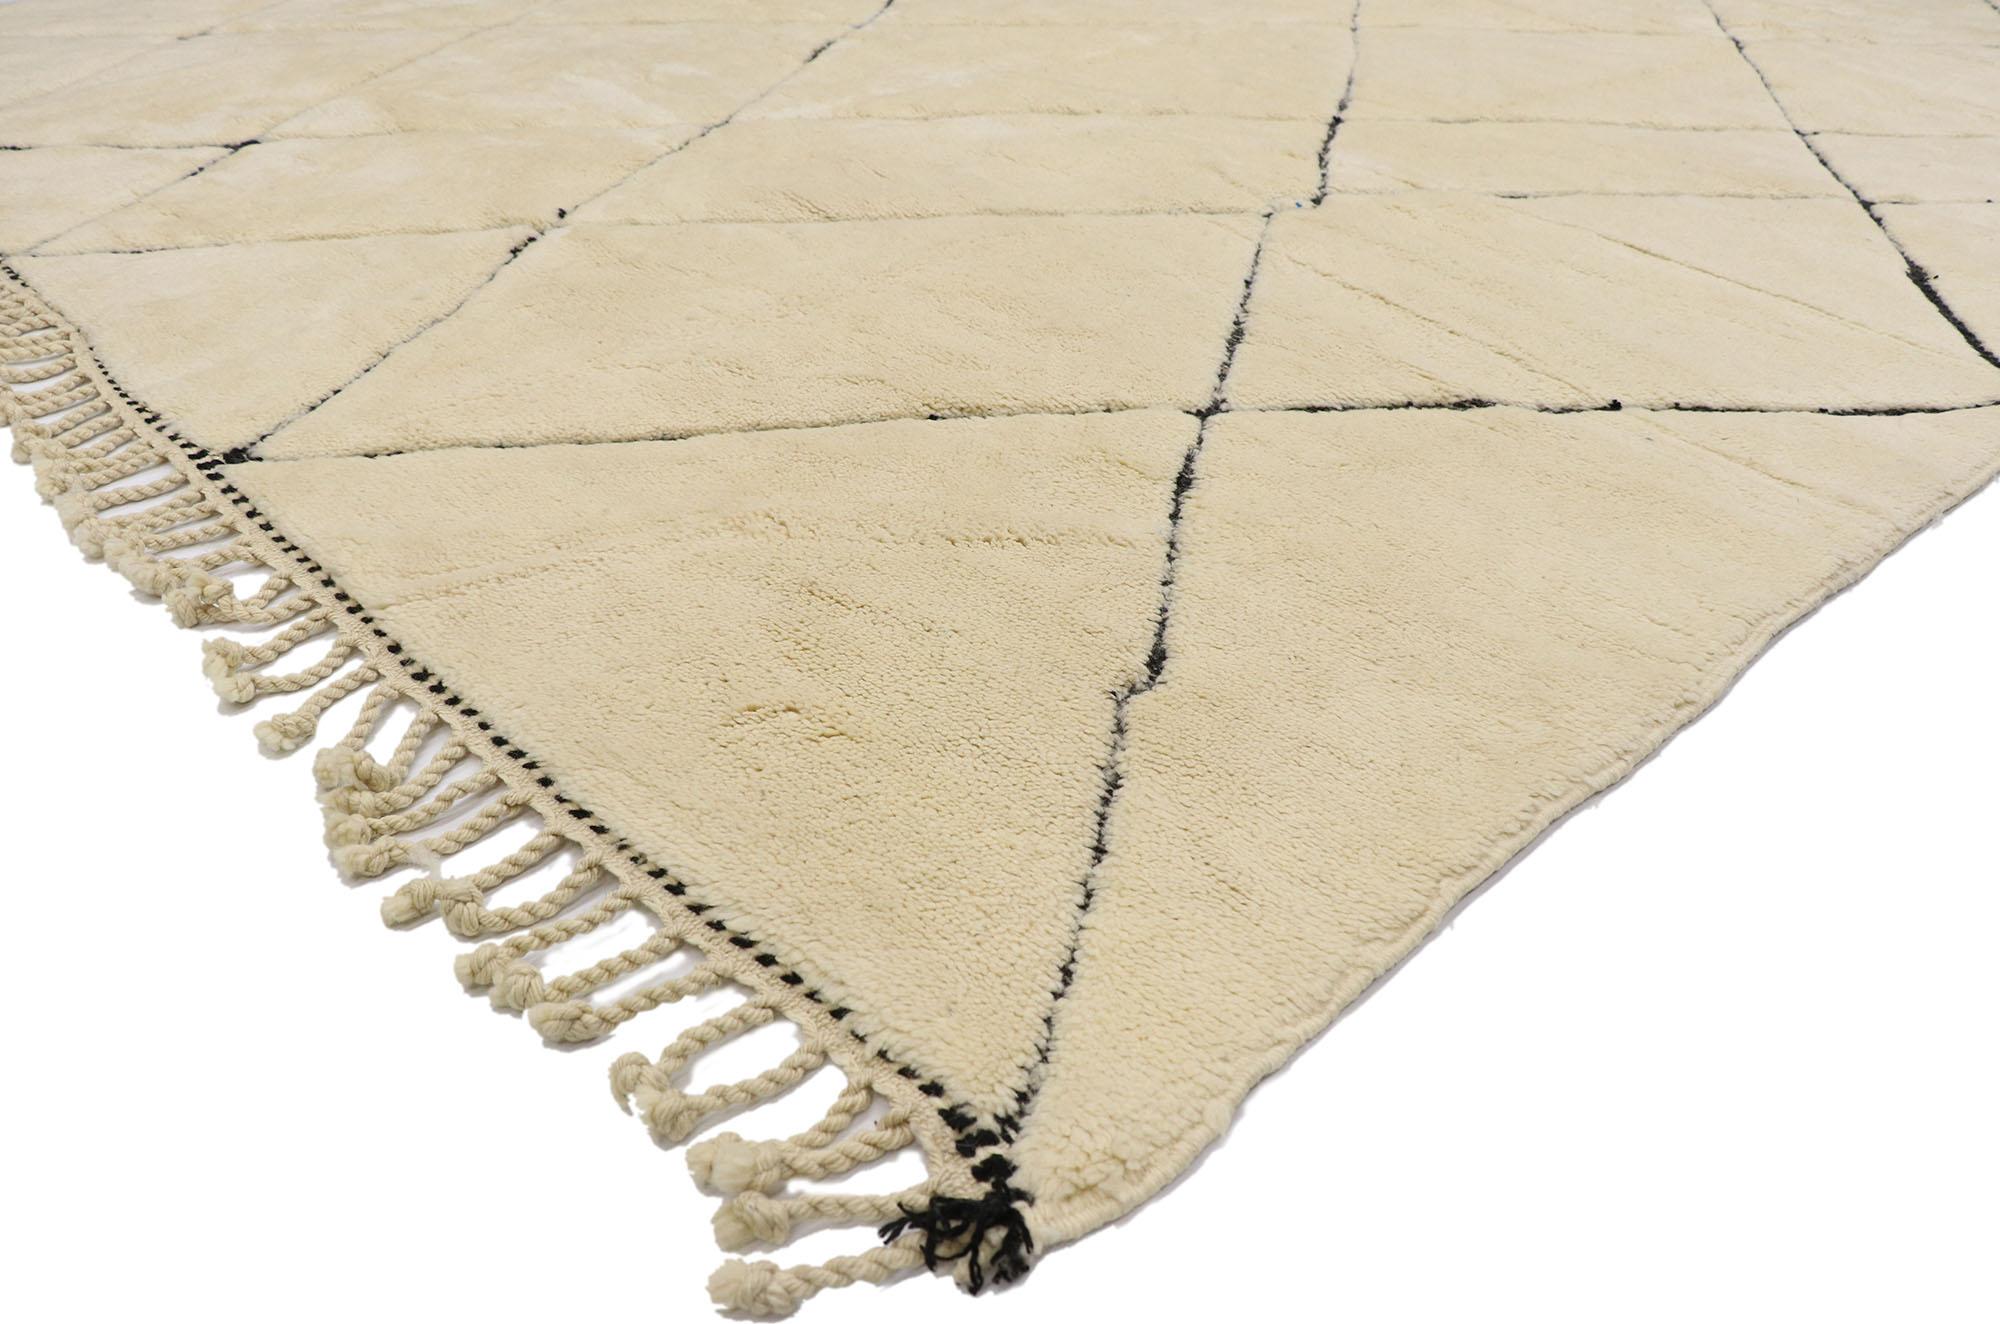 21175 New Contemporary Berber Moroccan rug with Minimalist Hygge Style 09'02 x 11'08. With its simplicity, plush pile and Hygge vibes, this hand knotted wool contemporary Moroccan rug provides a feeling of cozy contentment without the clutter. It